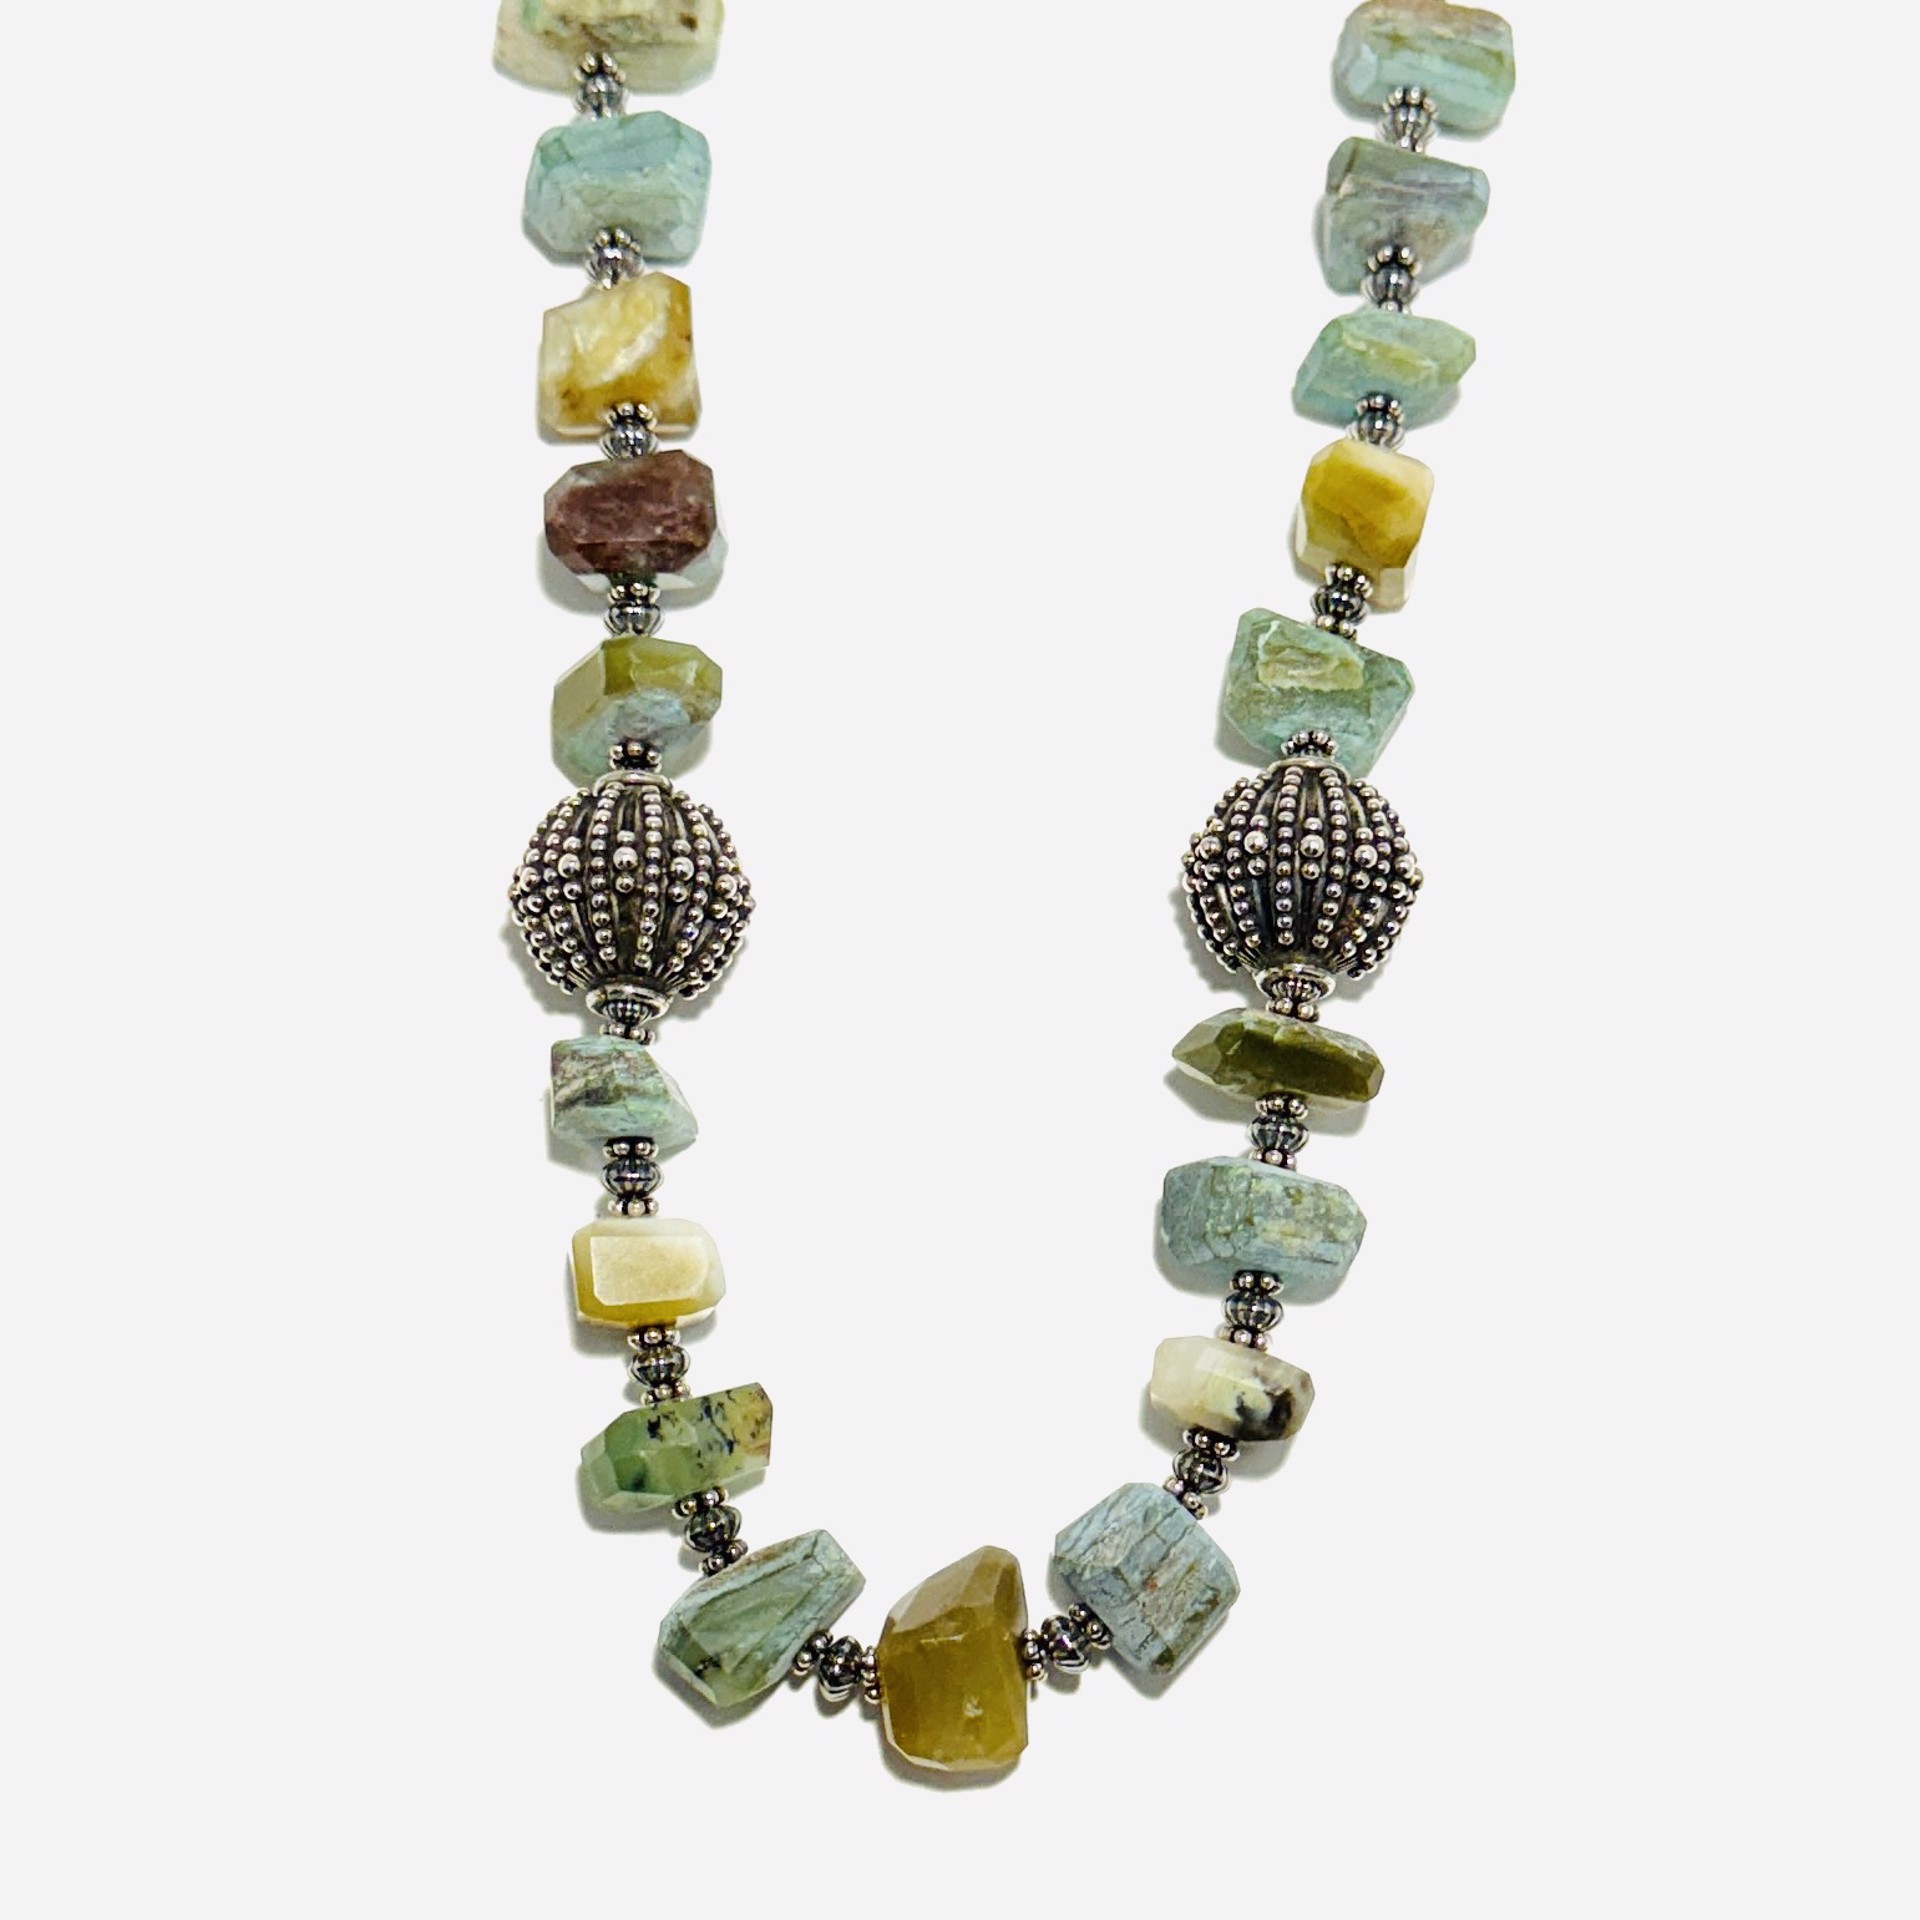 Peruvian Opal, Sterling Bead Necklace LS23-46 by Linda Sacra